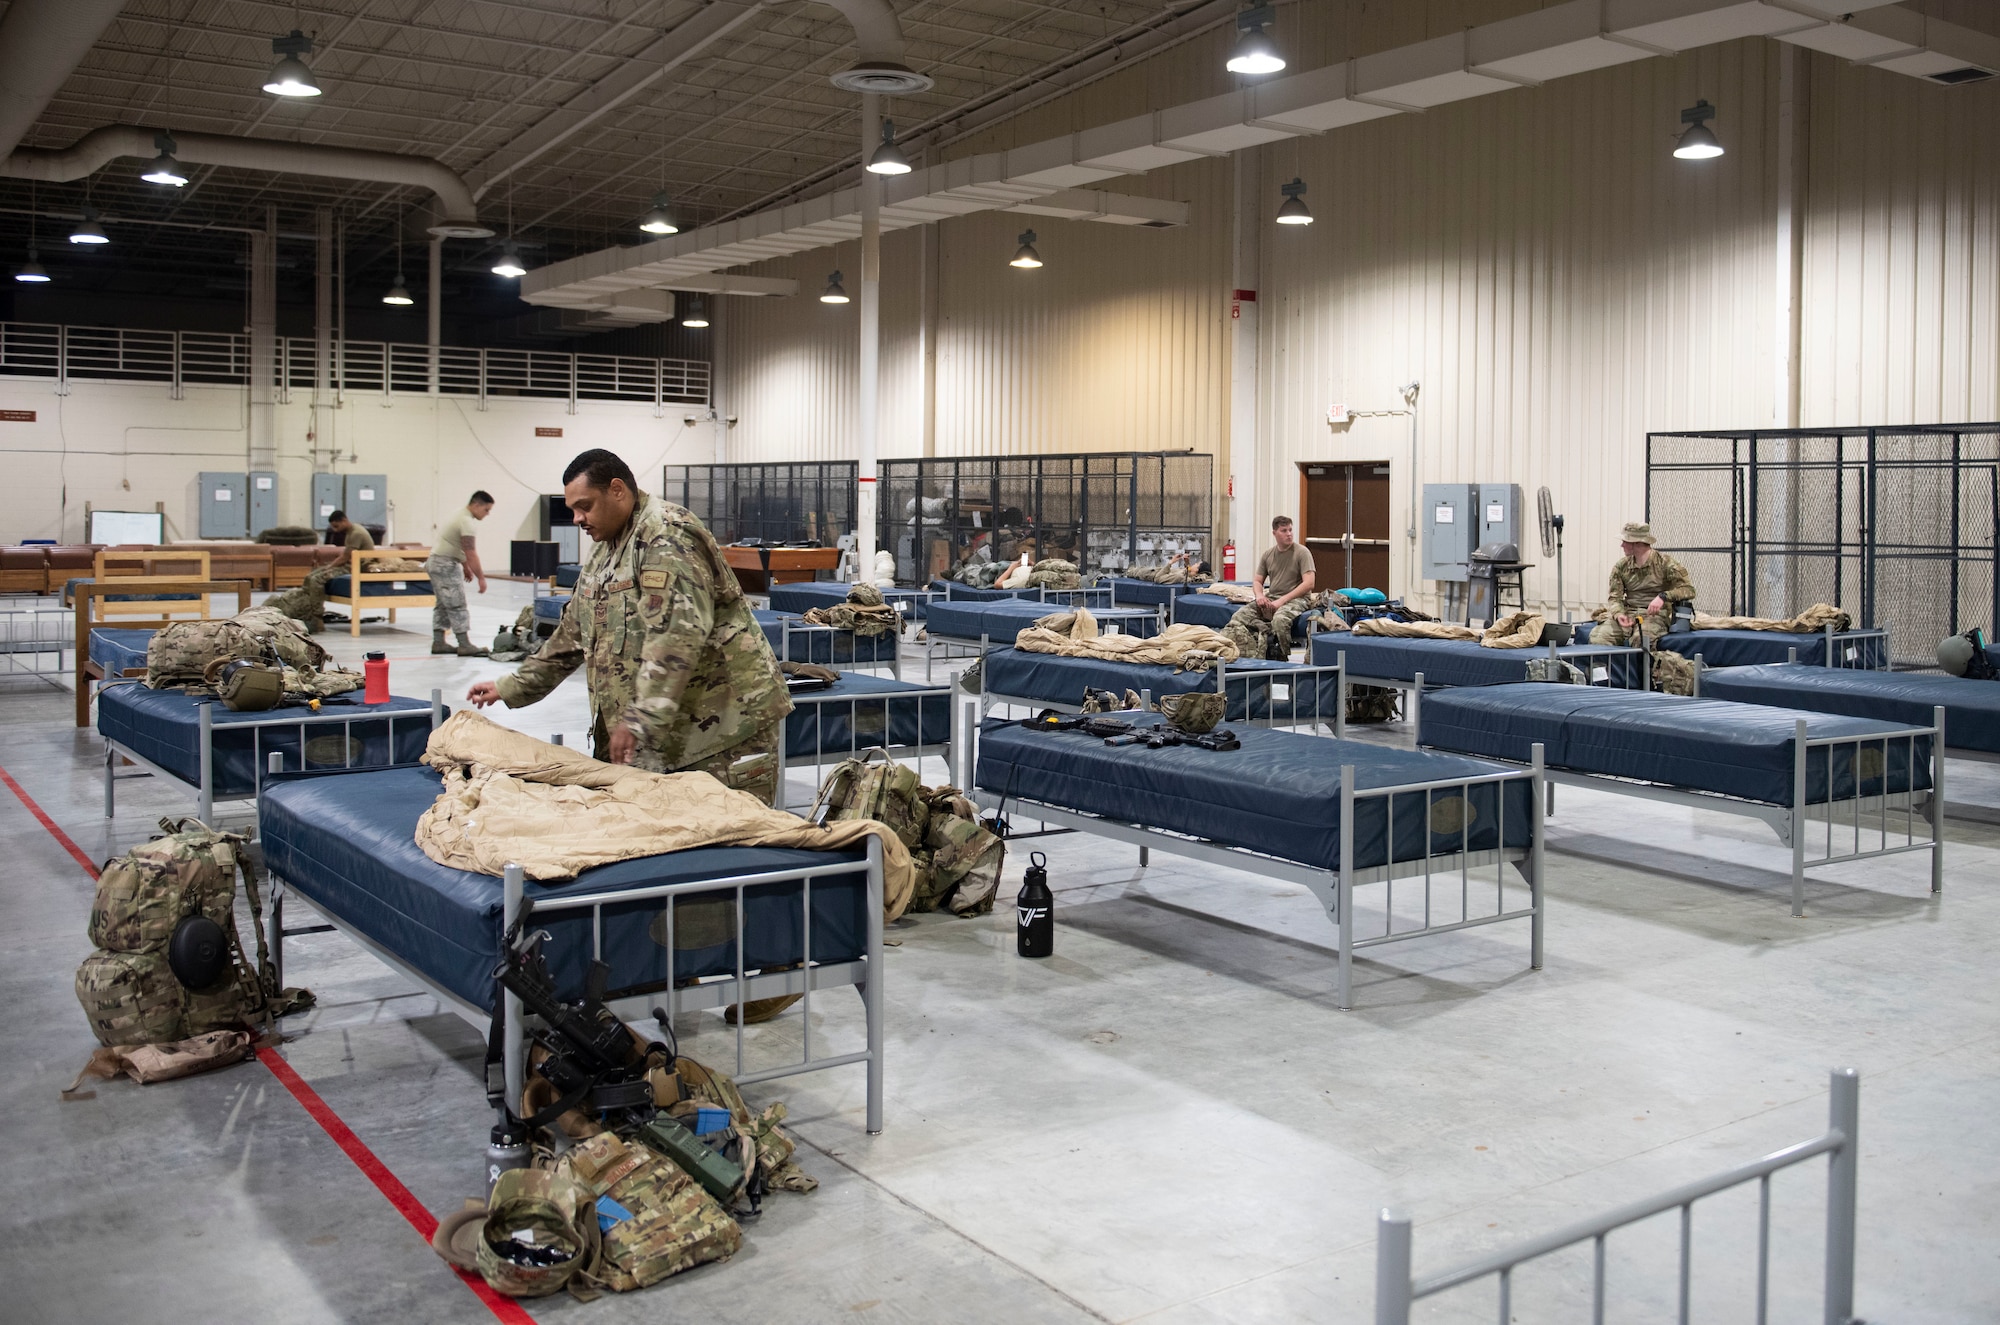 Photo of Airmen setting up beds